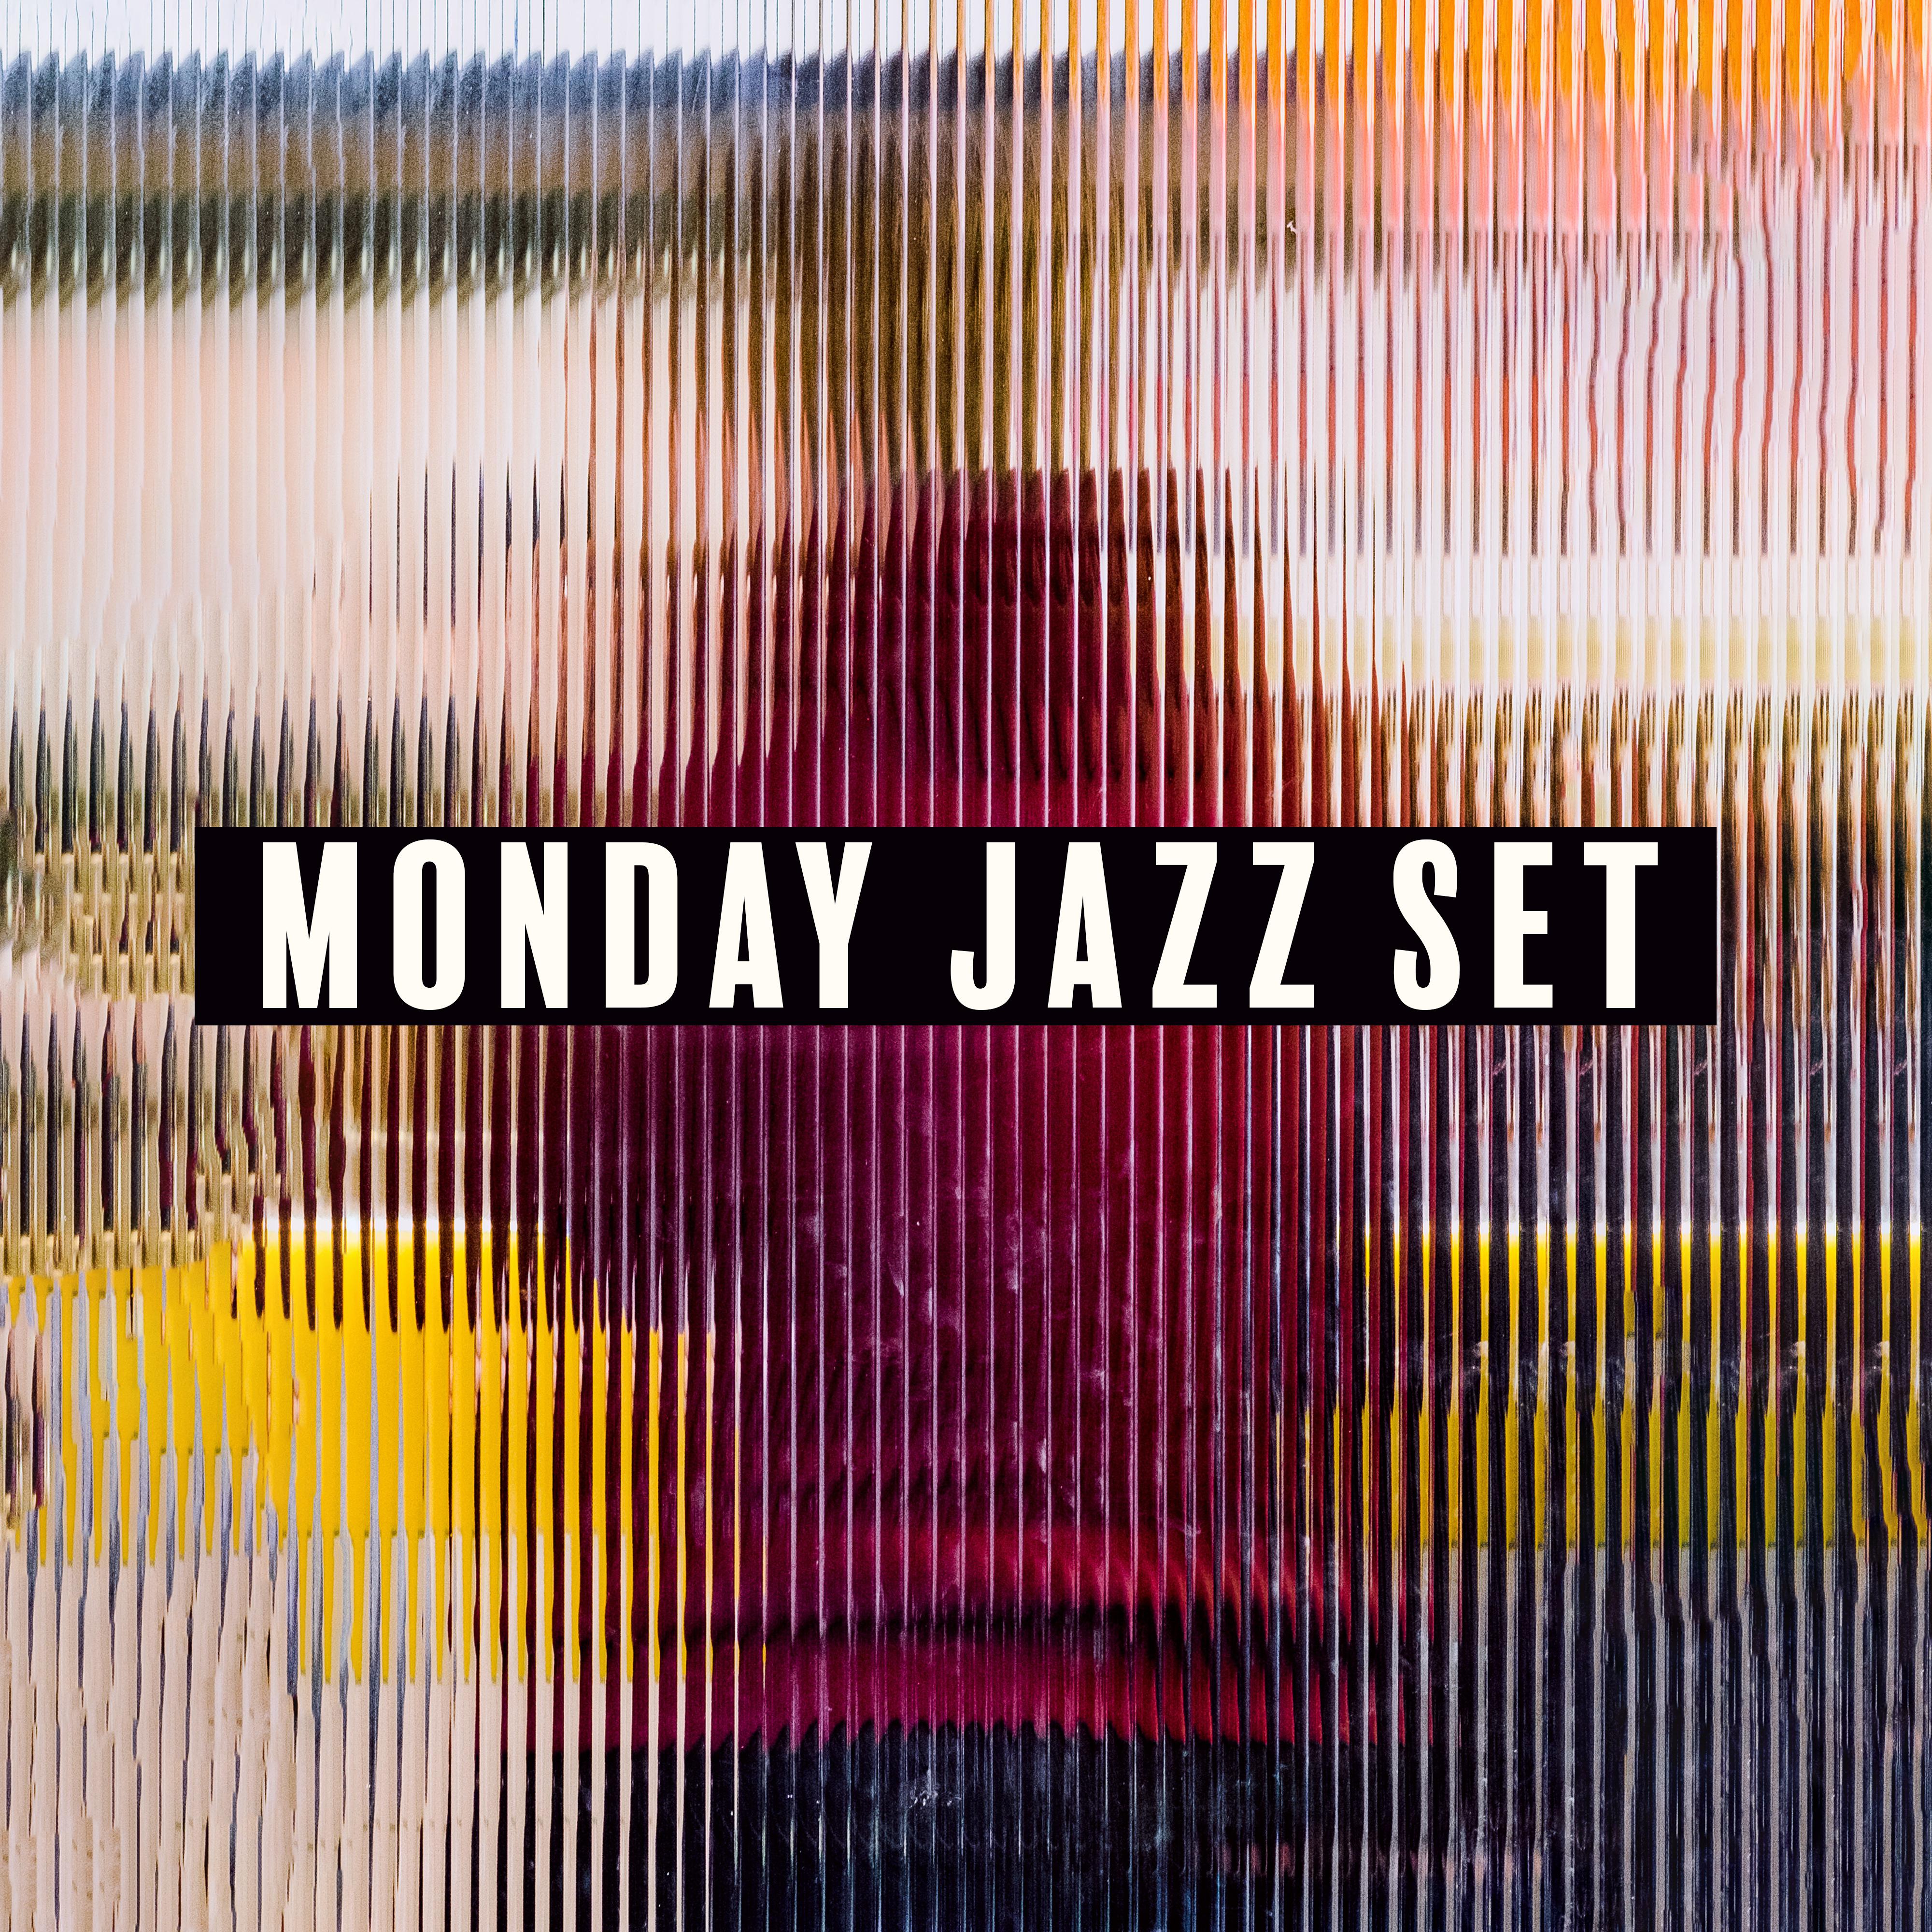 Monday Jazz Set - Music for a Good Start to the Week!